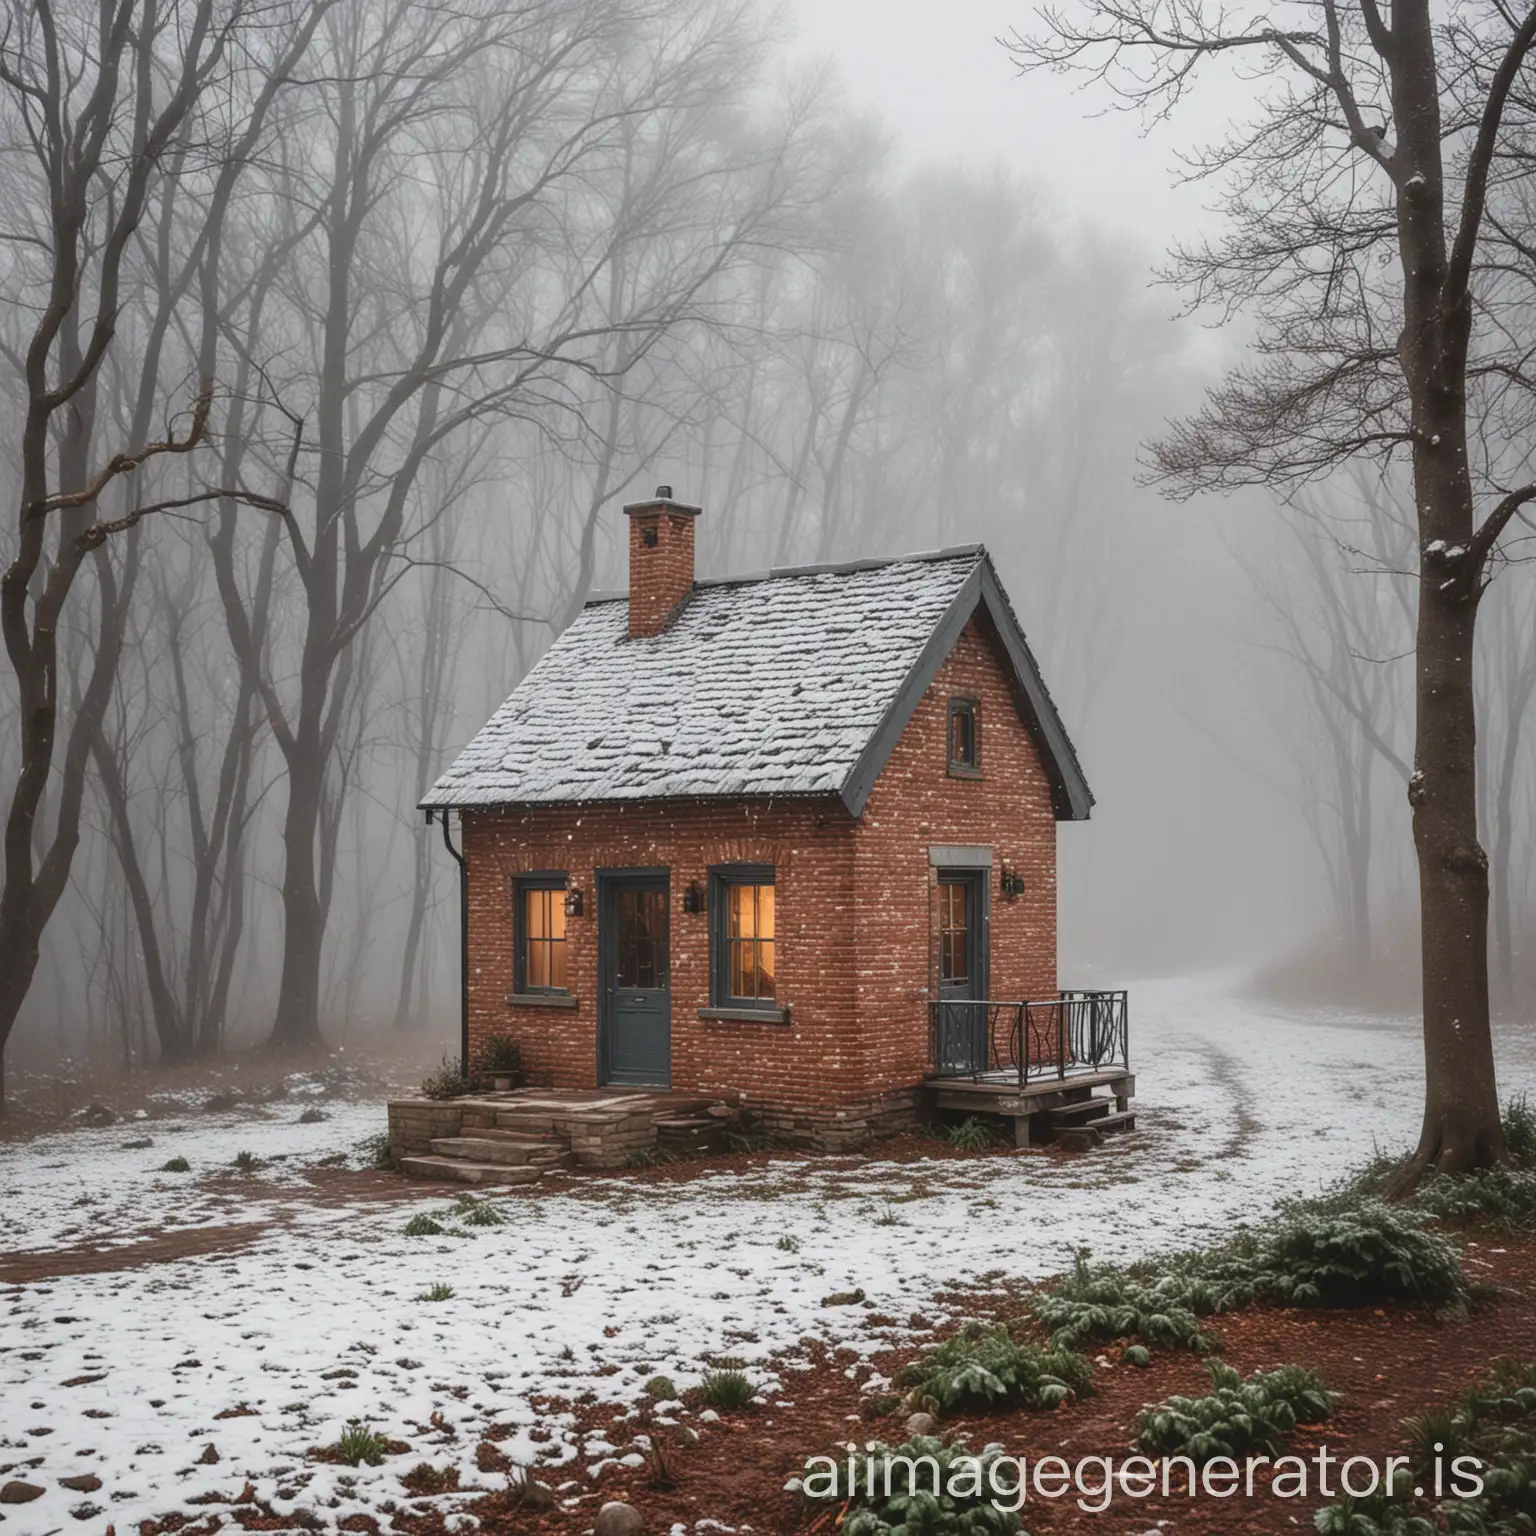 brick Tiny Small house in nature foggy snowing